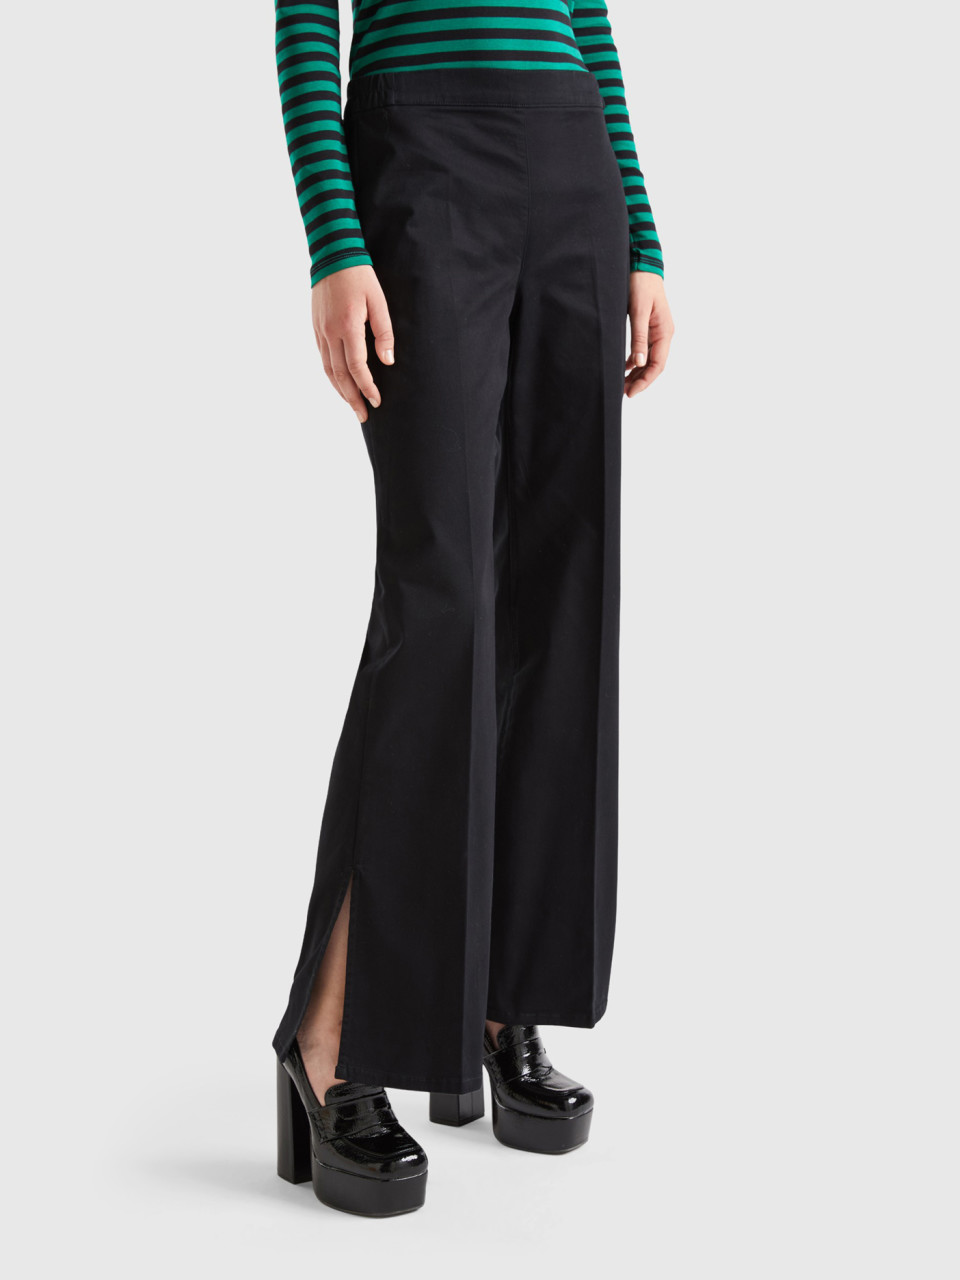 Benetton, Flared Trousers With Slits, Black, Women